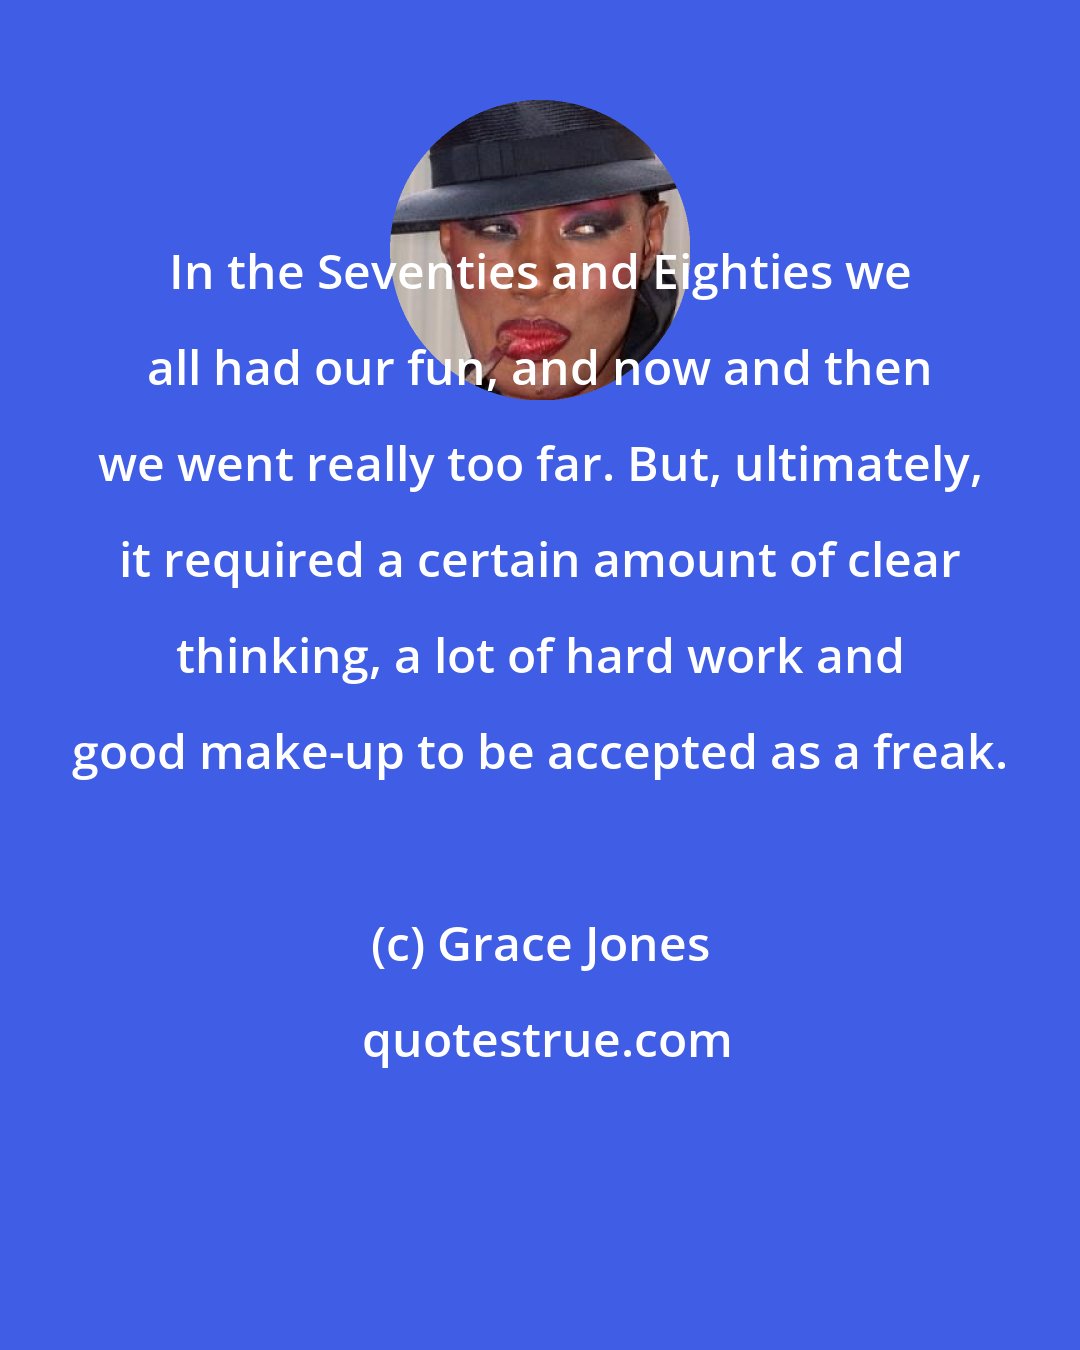 Grace Jones: In the Seventies and Eighties we all had our fun, and now and then we went really too far. But, ultimately, it required a certain amount of clear thinking, a lot of hard work and good make-up to be accepted as a freak.